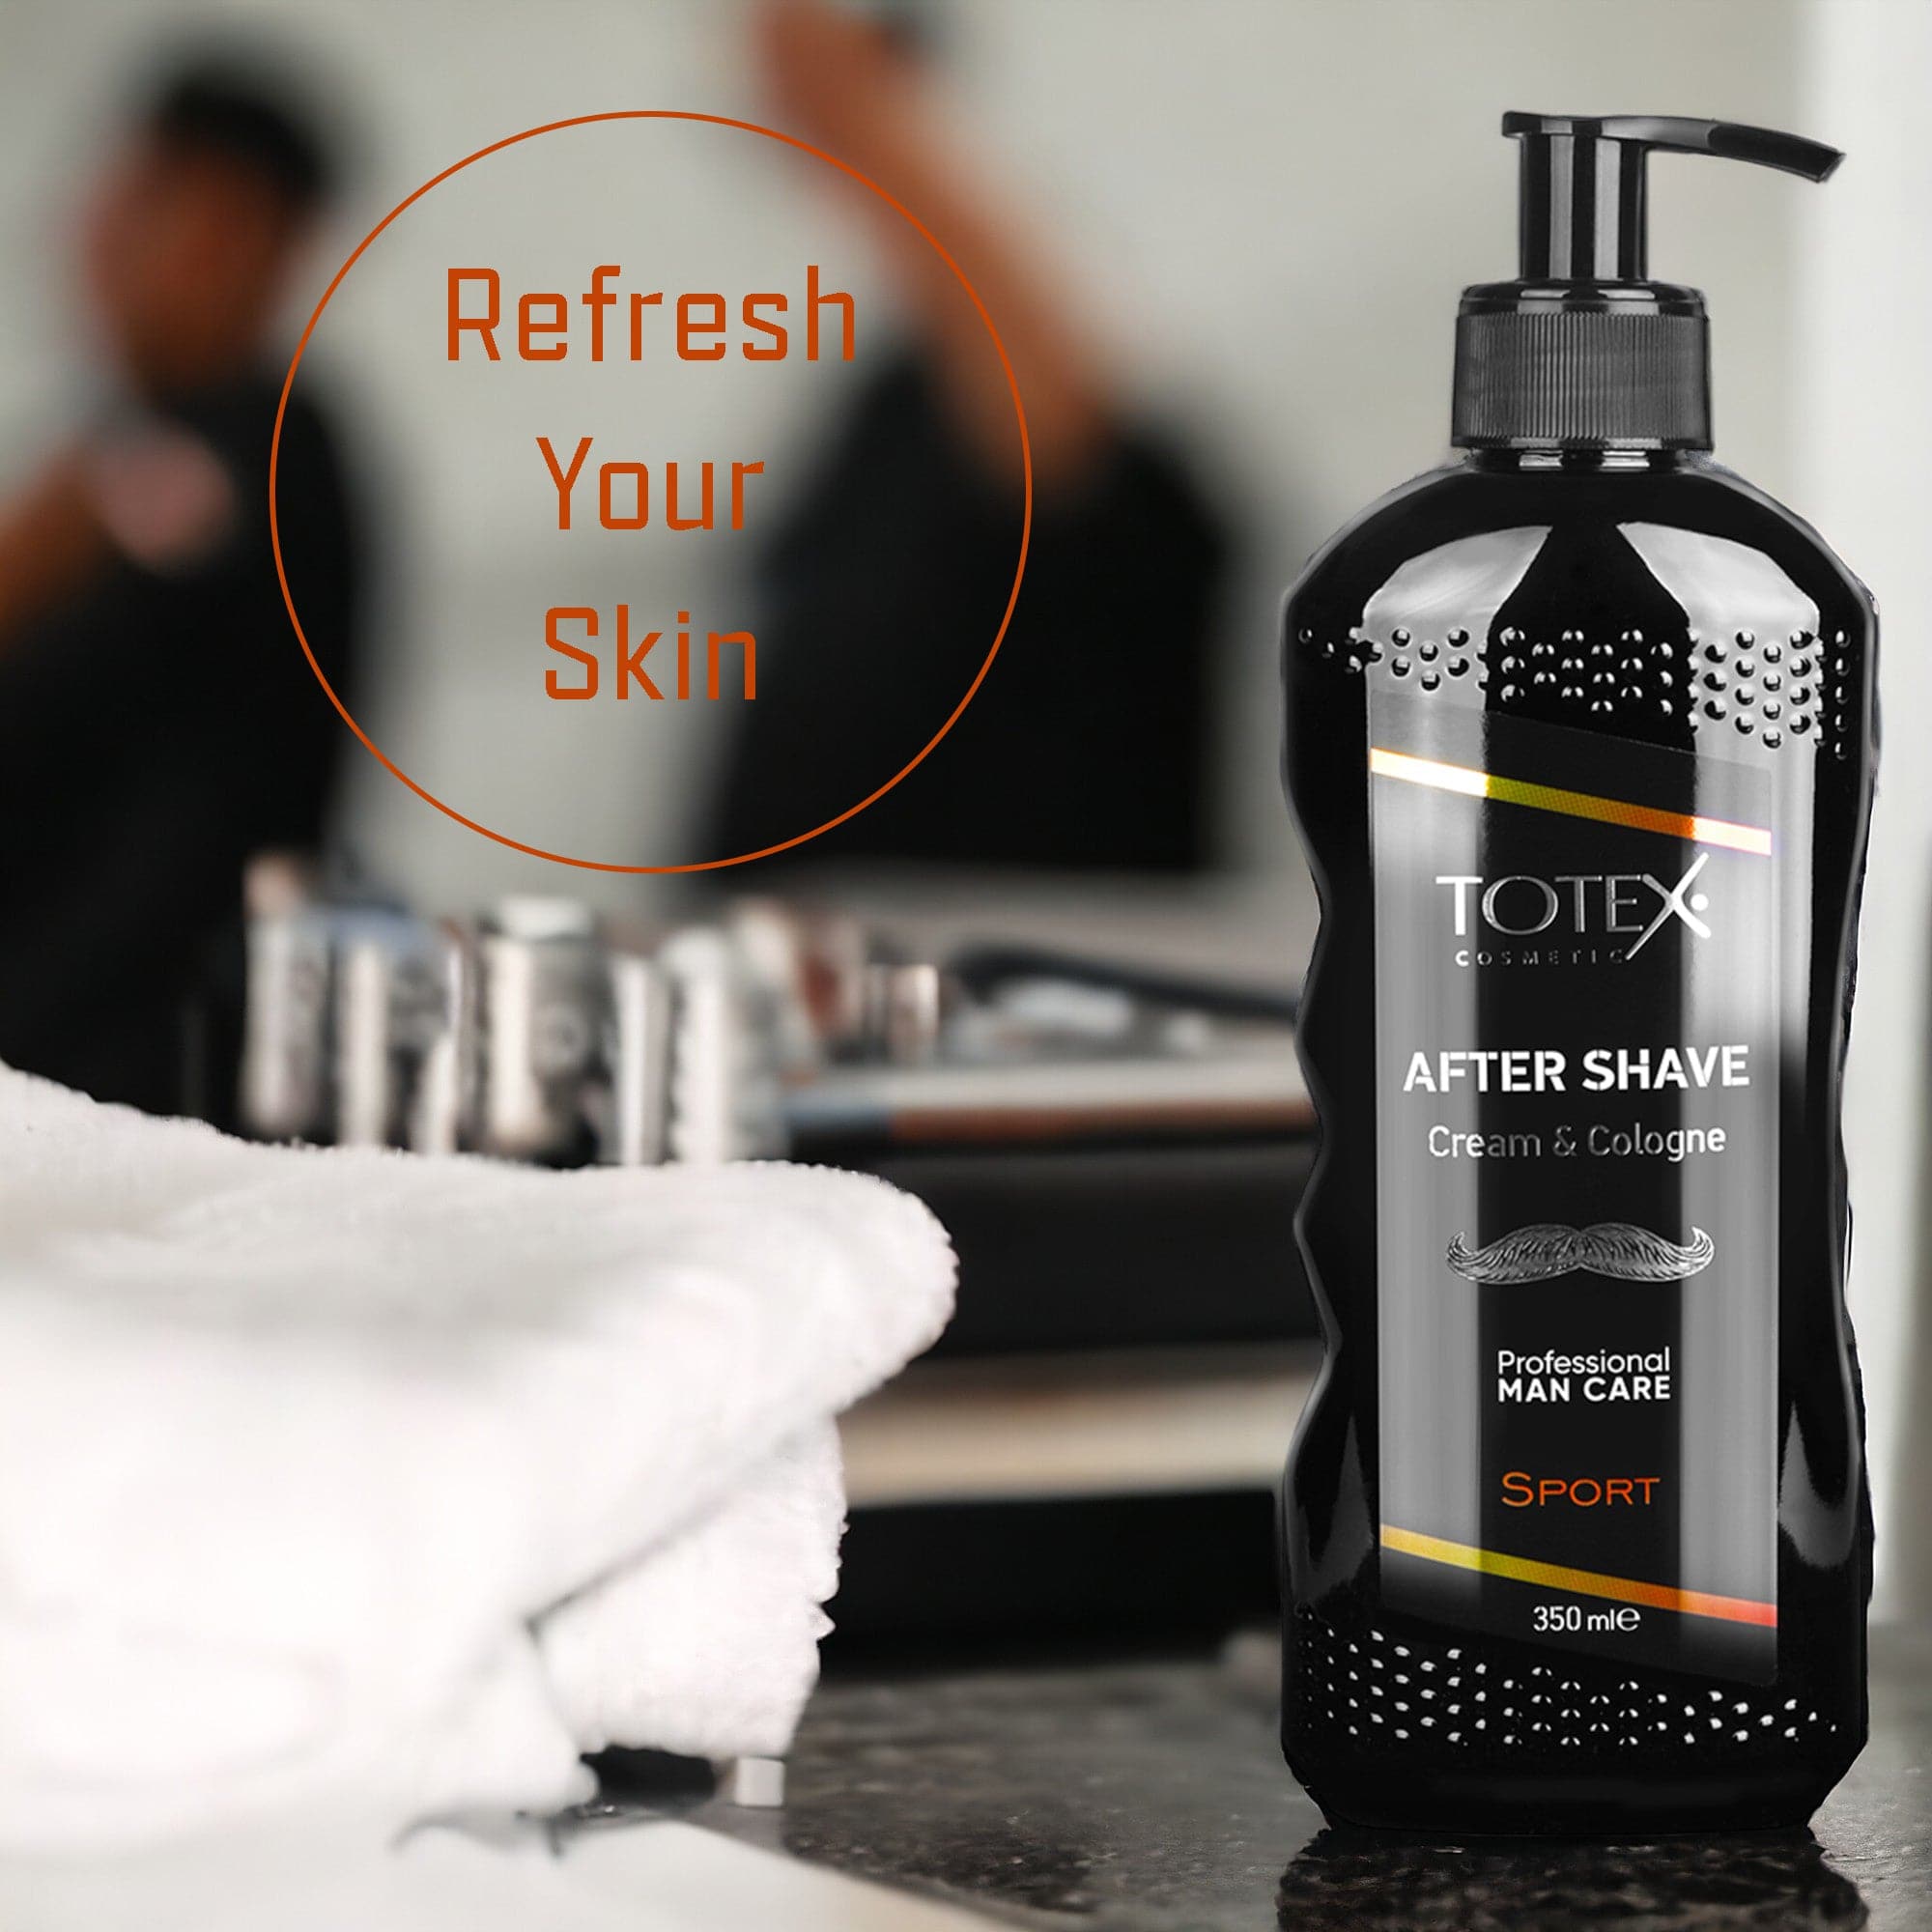 Totex - After Shave Cream & Cologne Sport 350ml